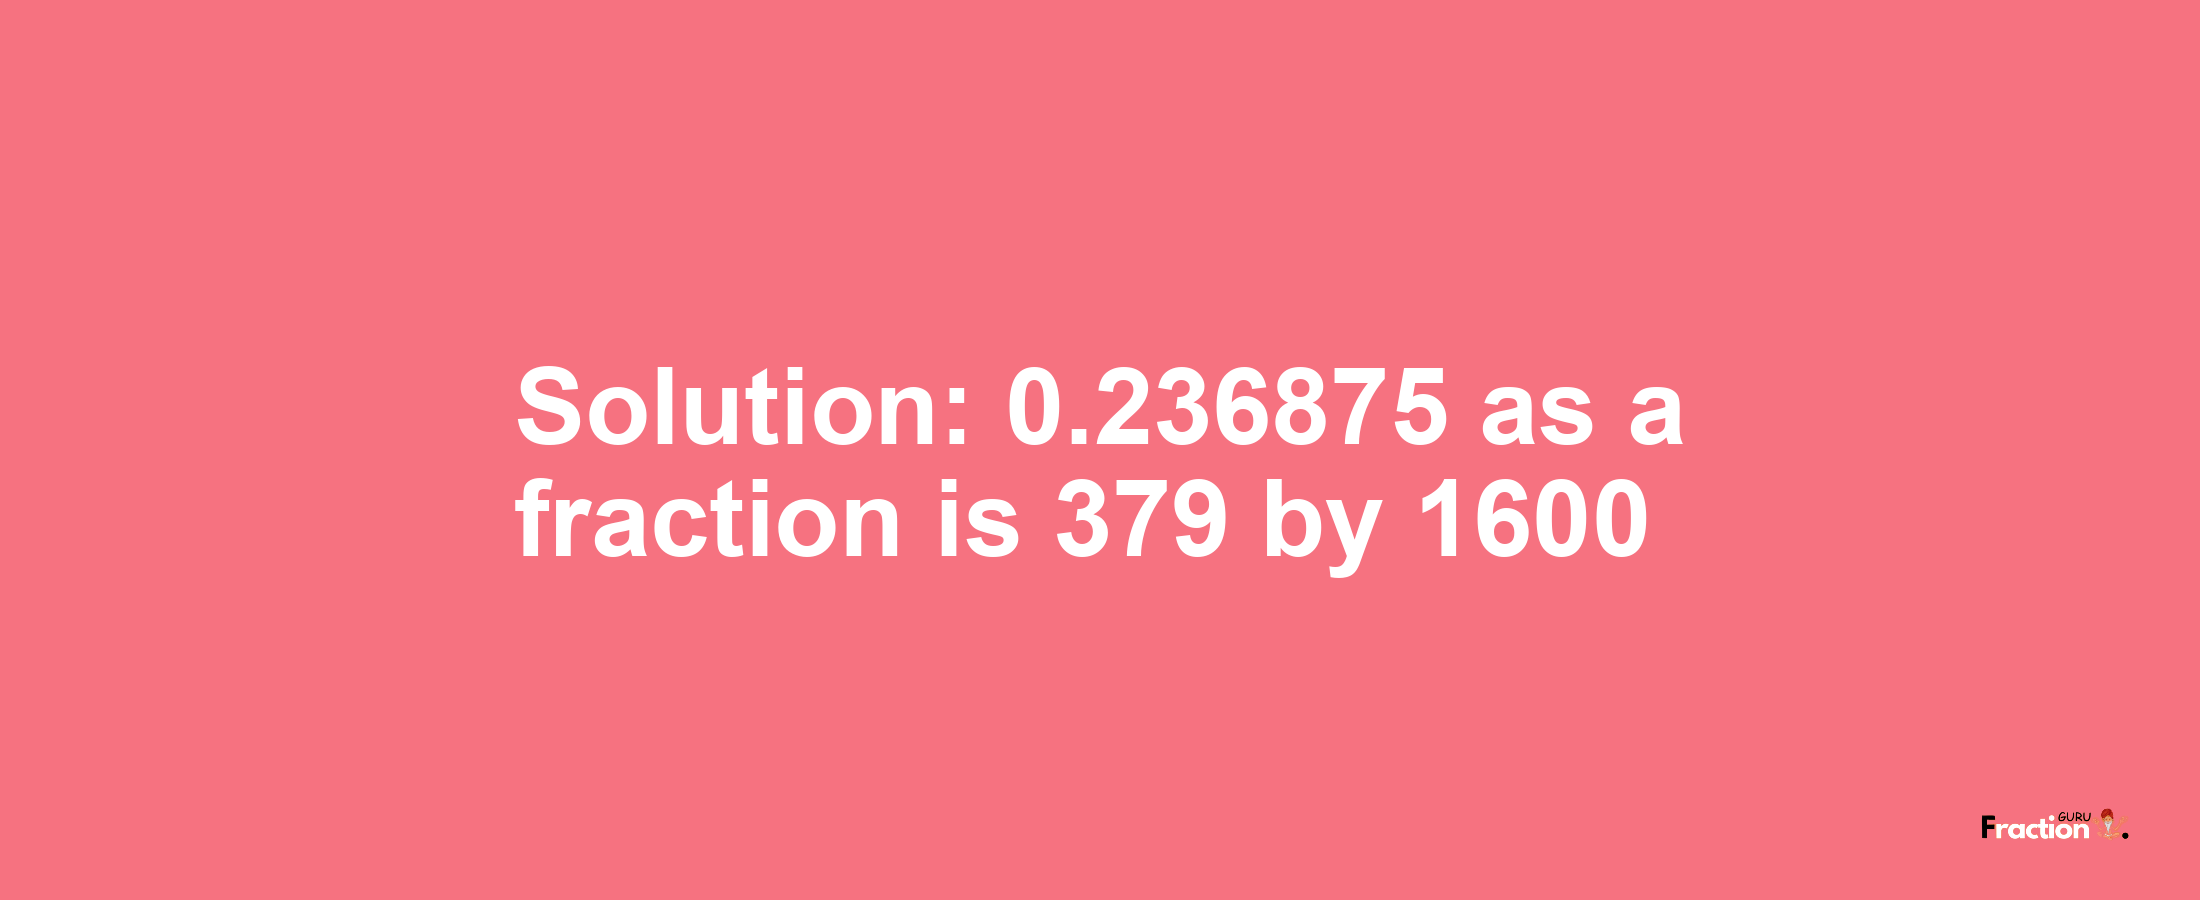 Solution:0.236875 as a fraction is 379/1600